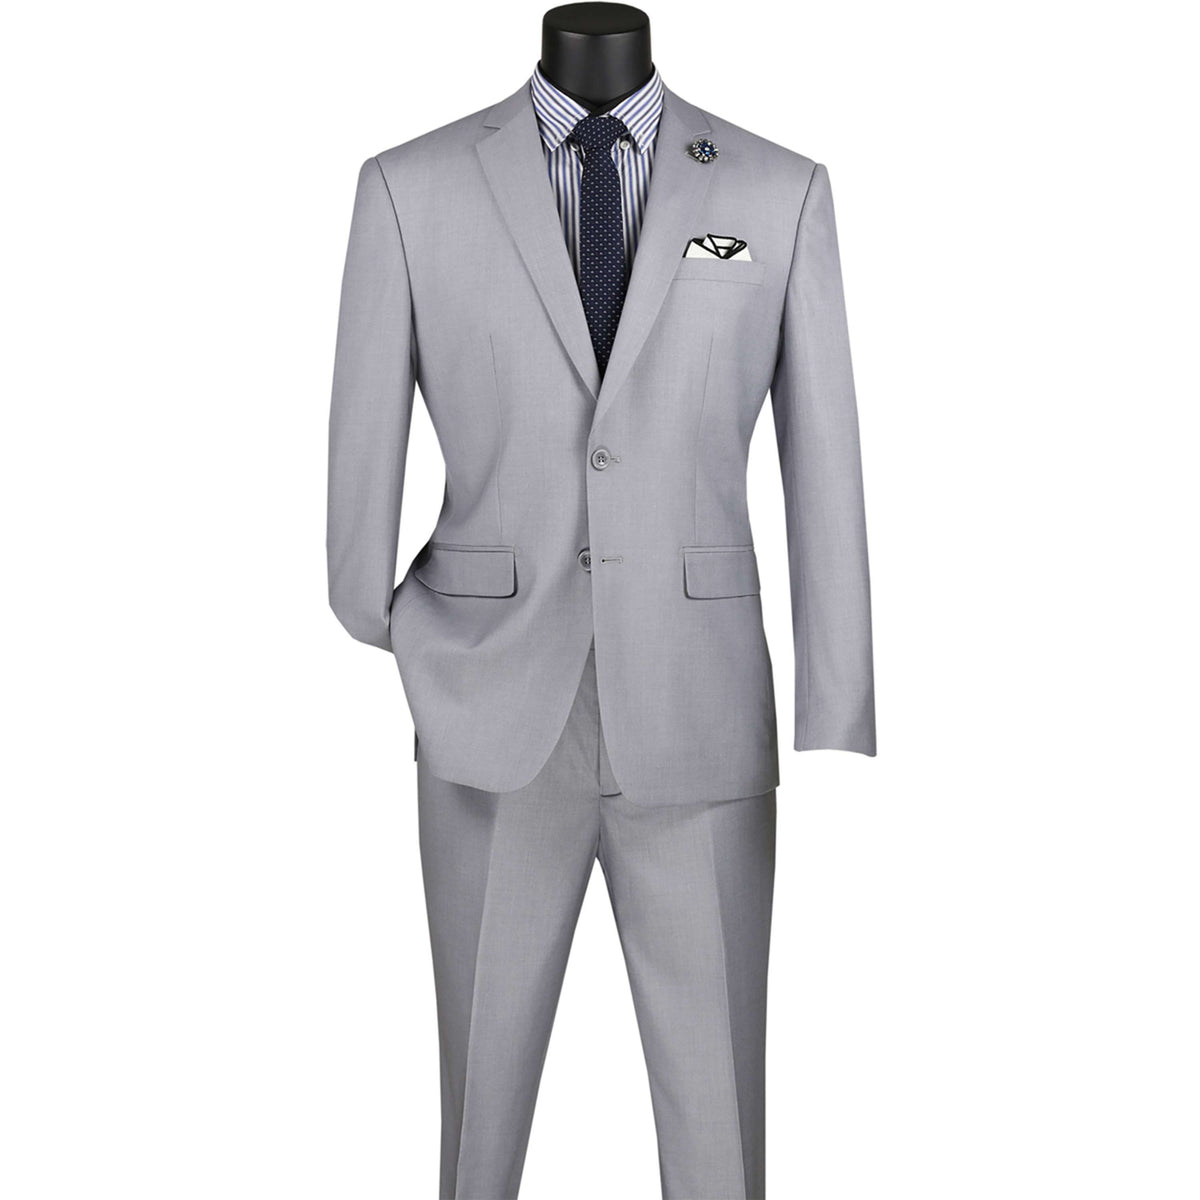 2-Button Slim-Fit Suit in Light Gray